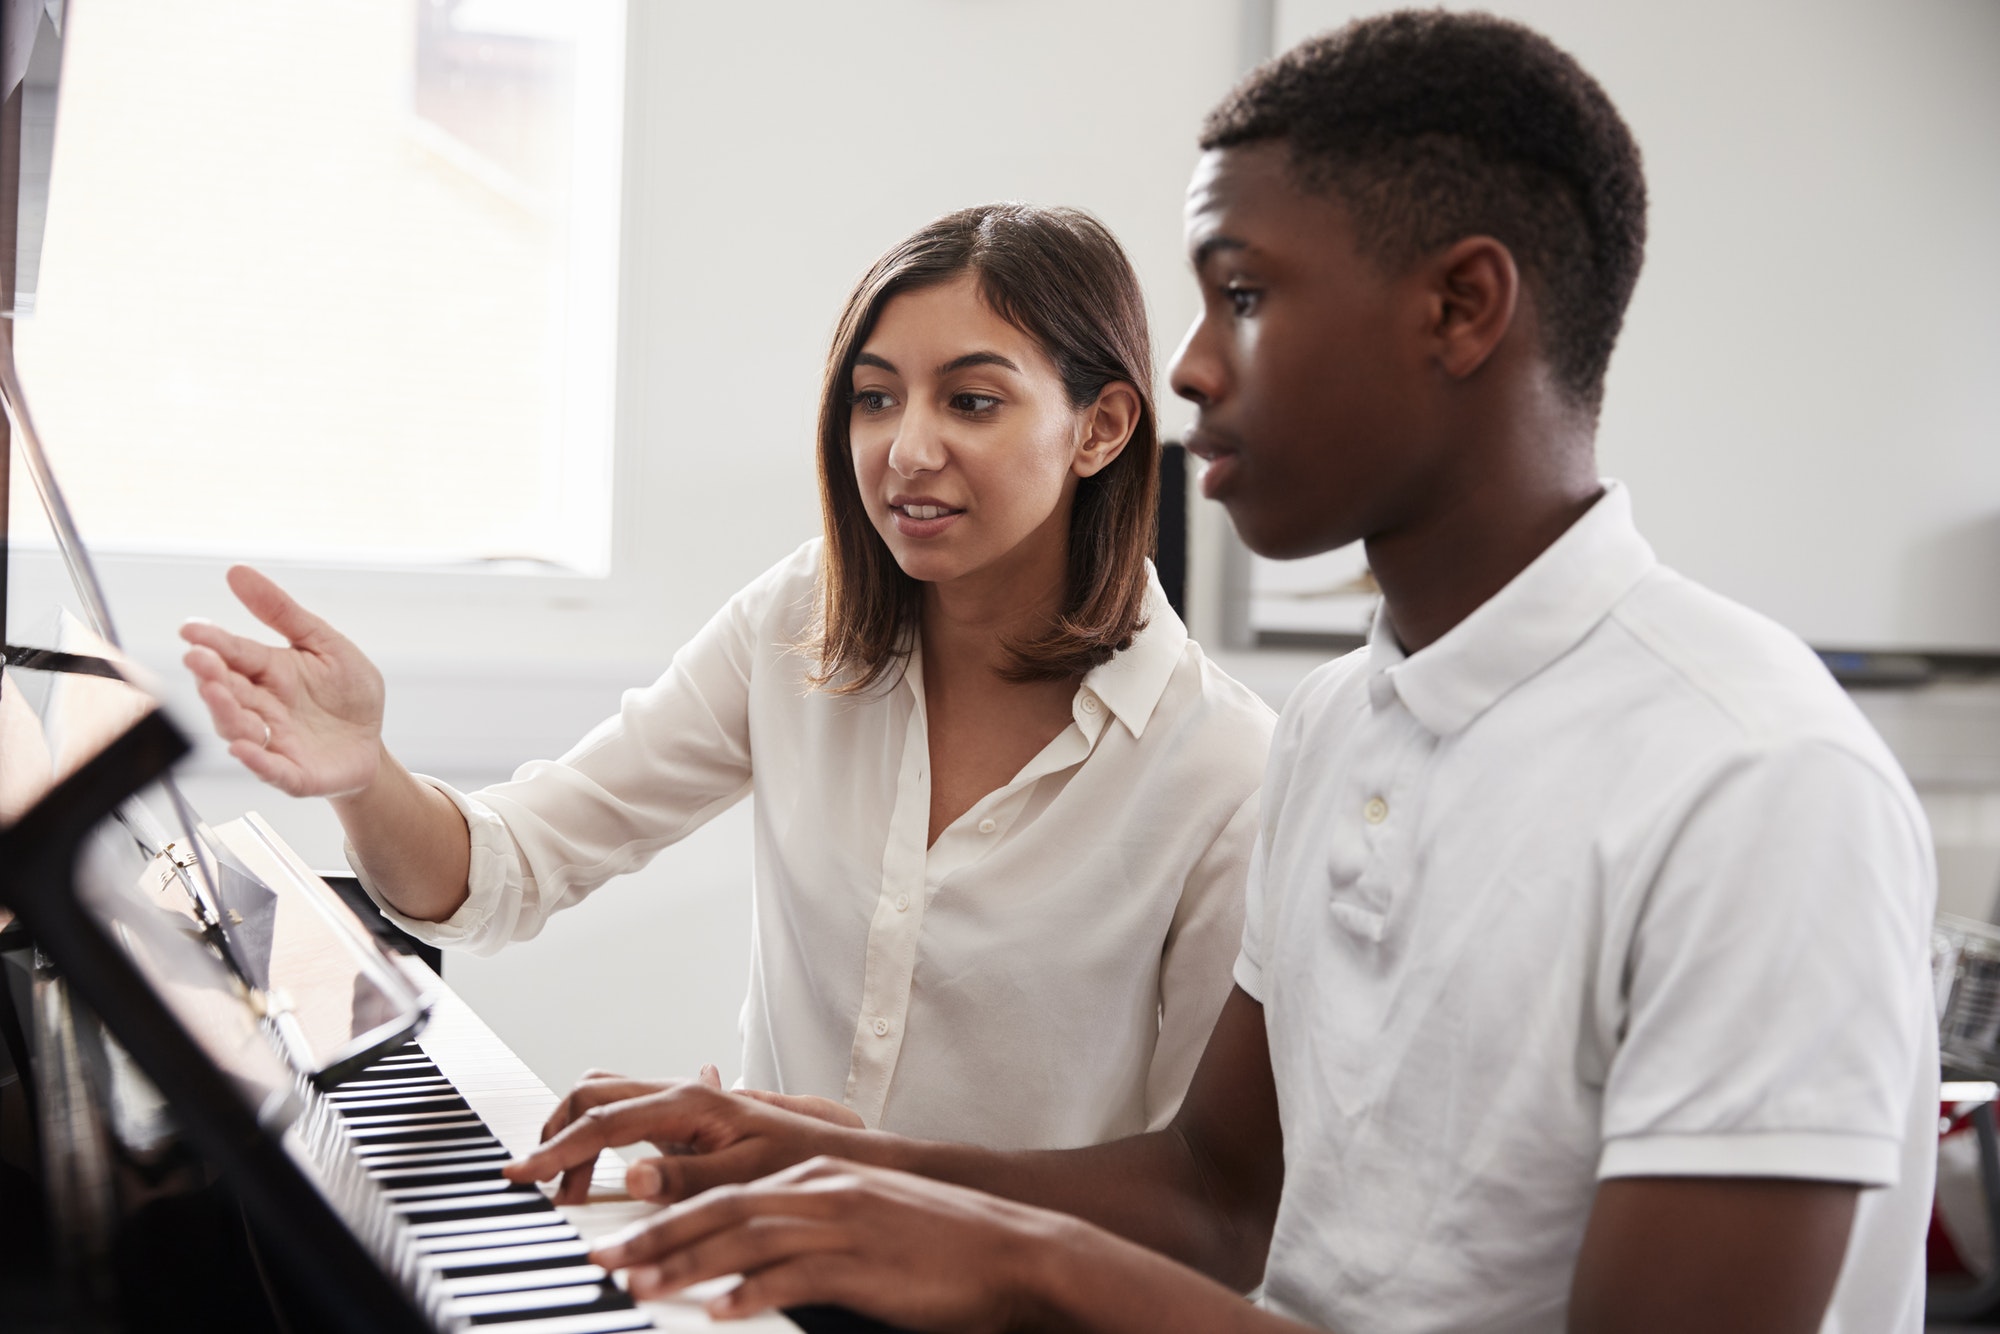 Adult Piano Lessons Near Me